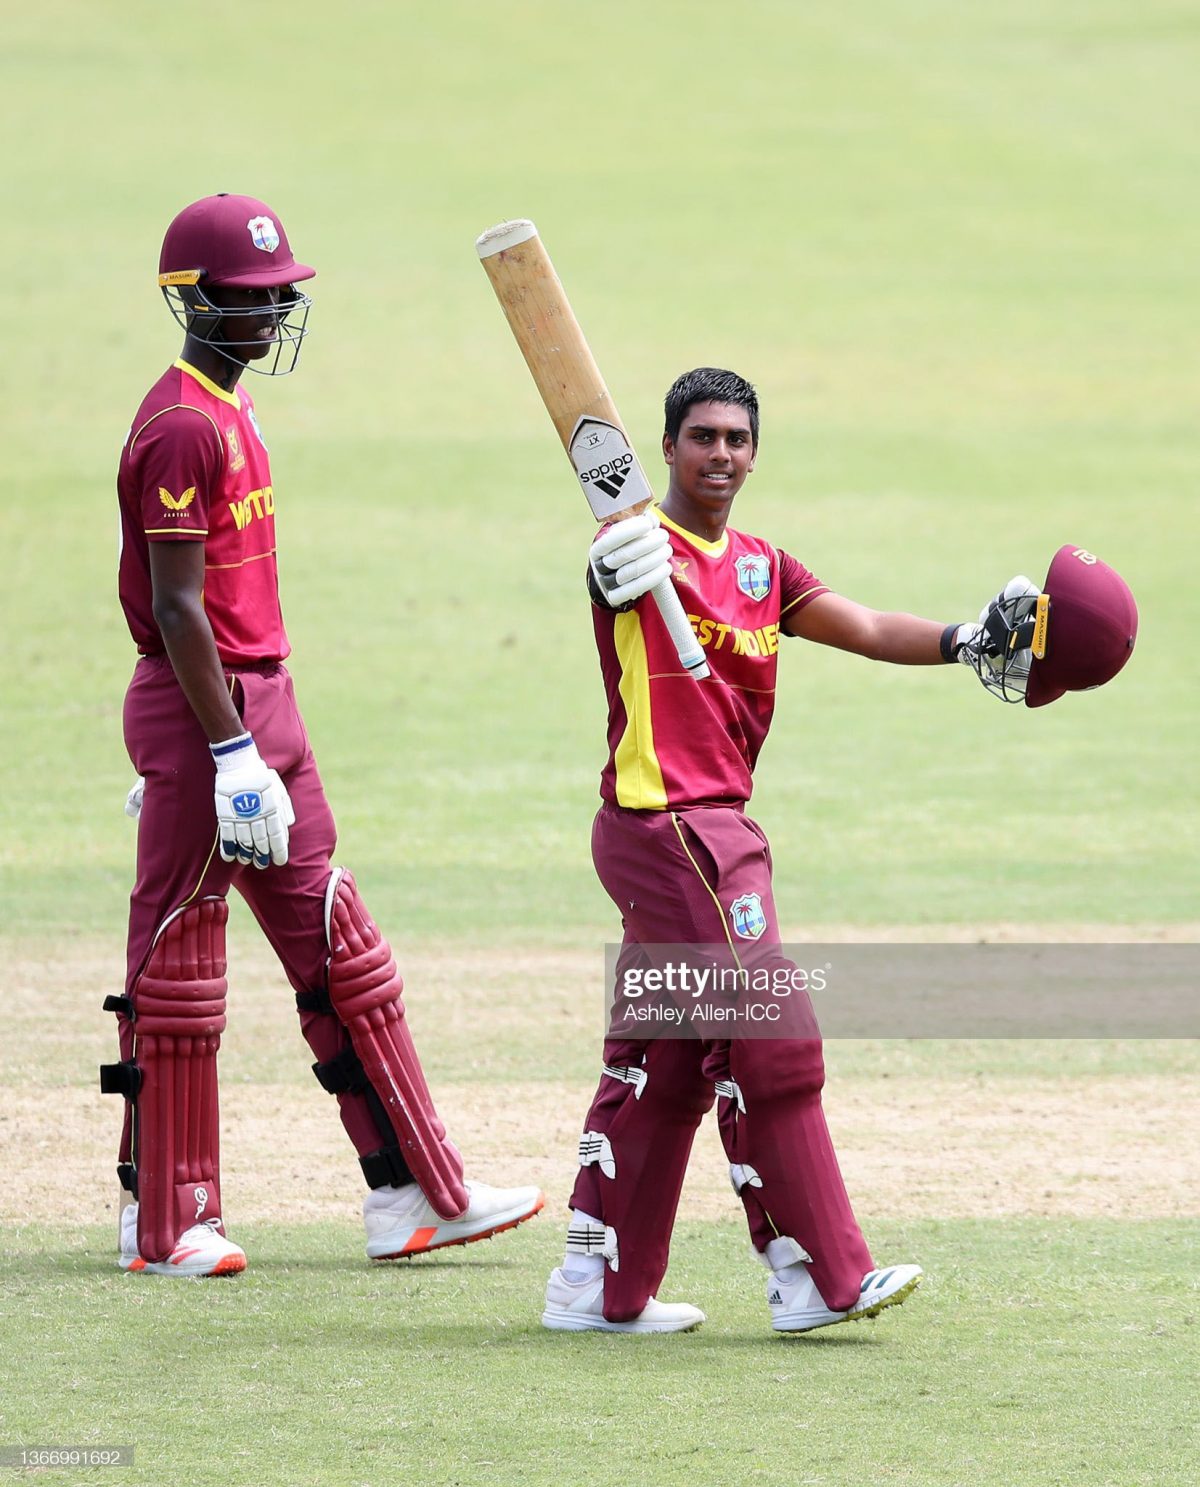 Matthew Nandu acknowledges his teammates after bringing up his century (Getty Images)